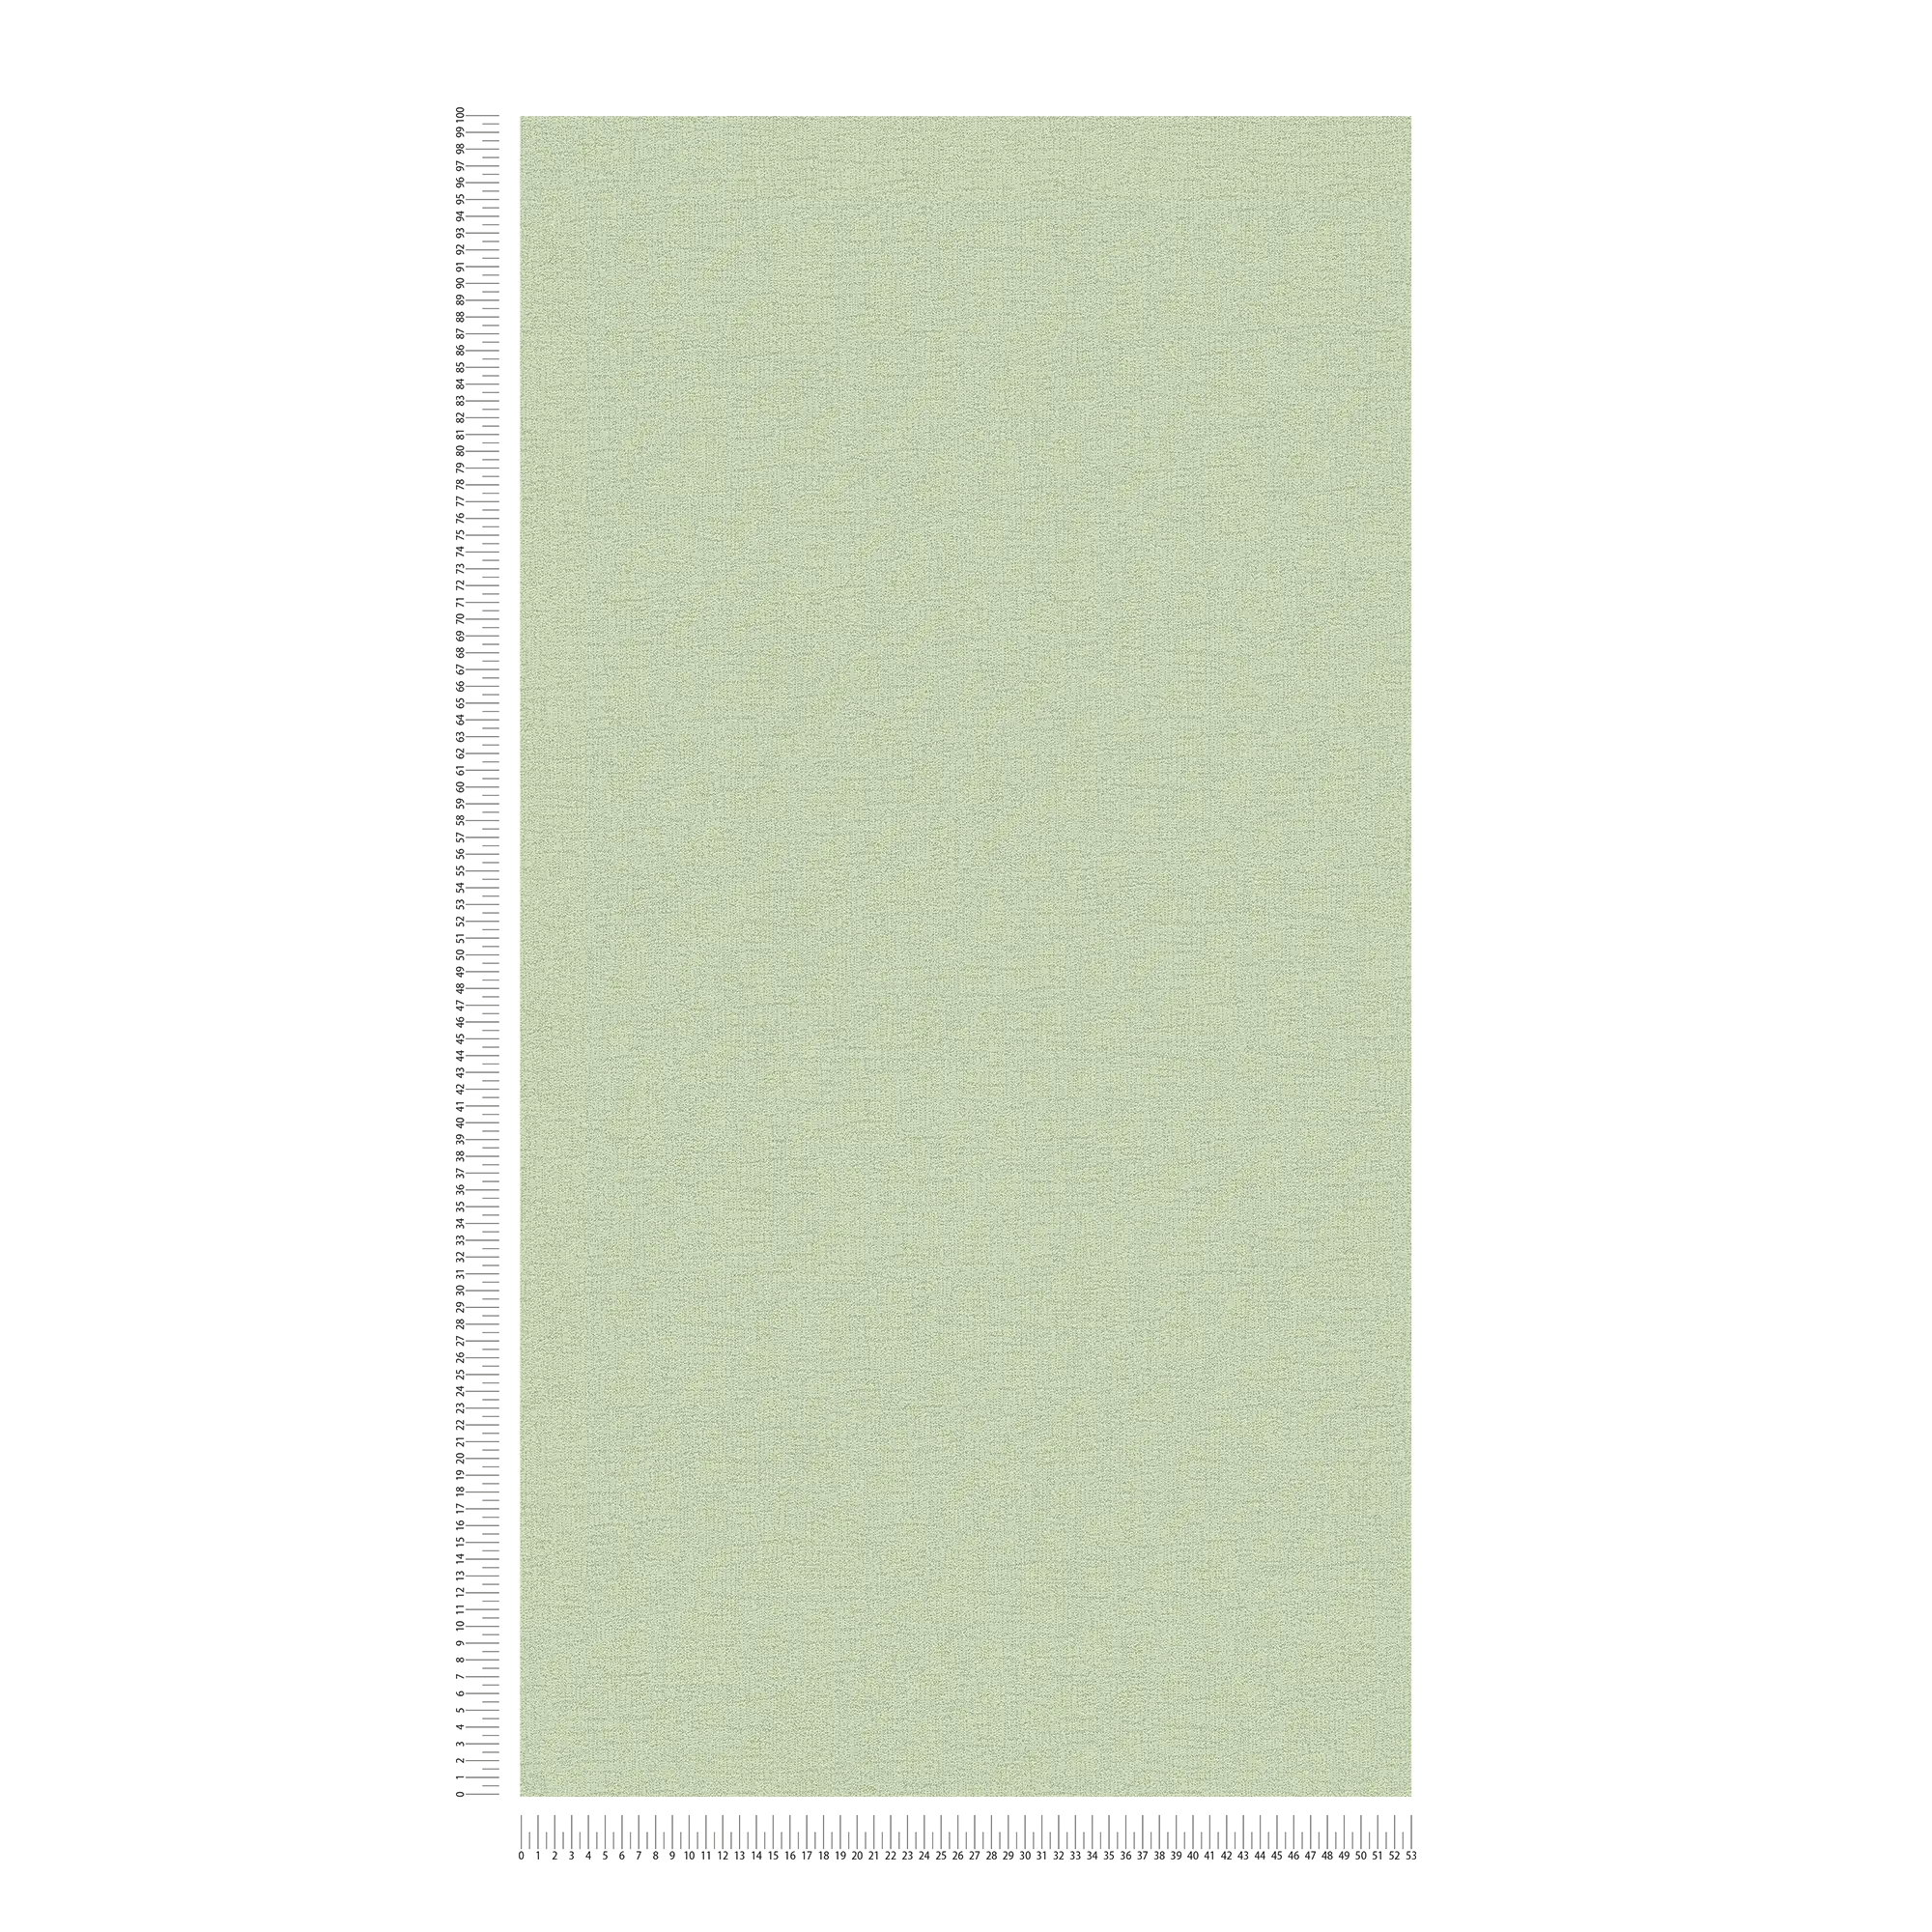             Non-woven wallpaper with fine linen structure - green
        